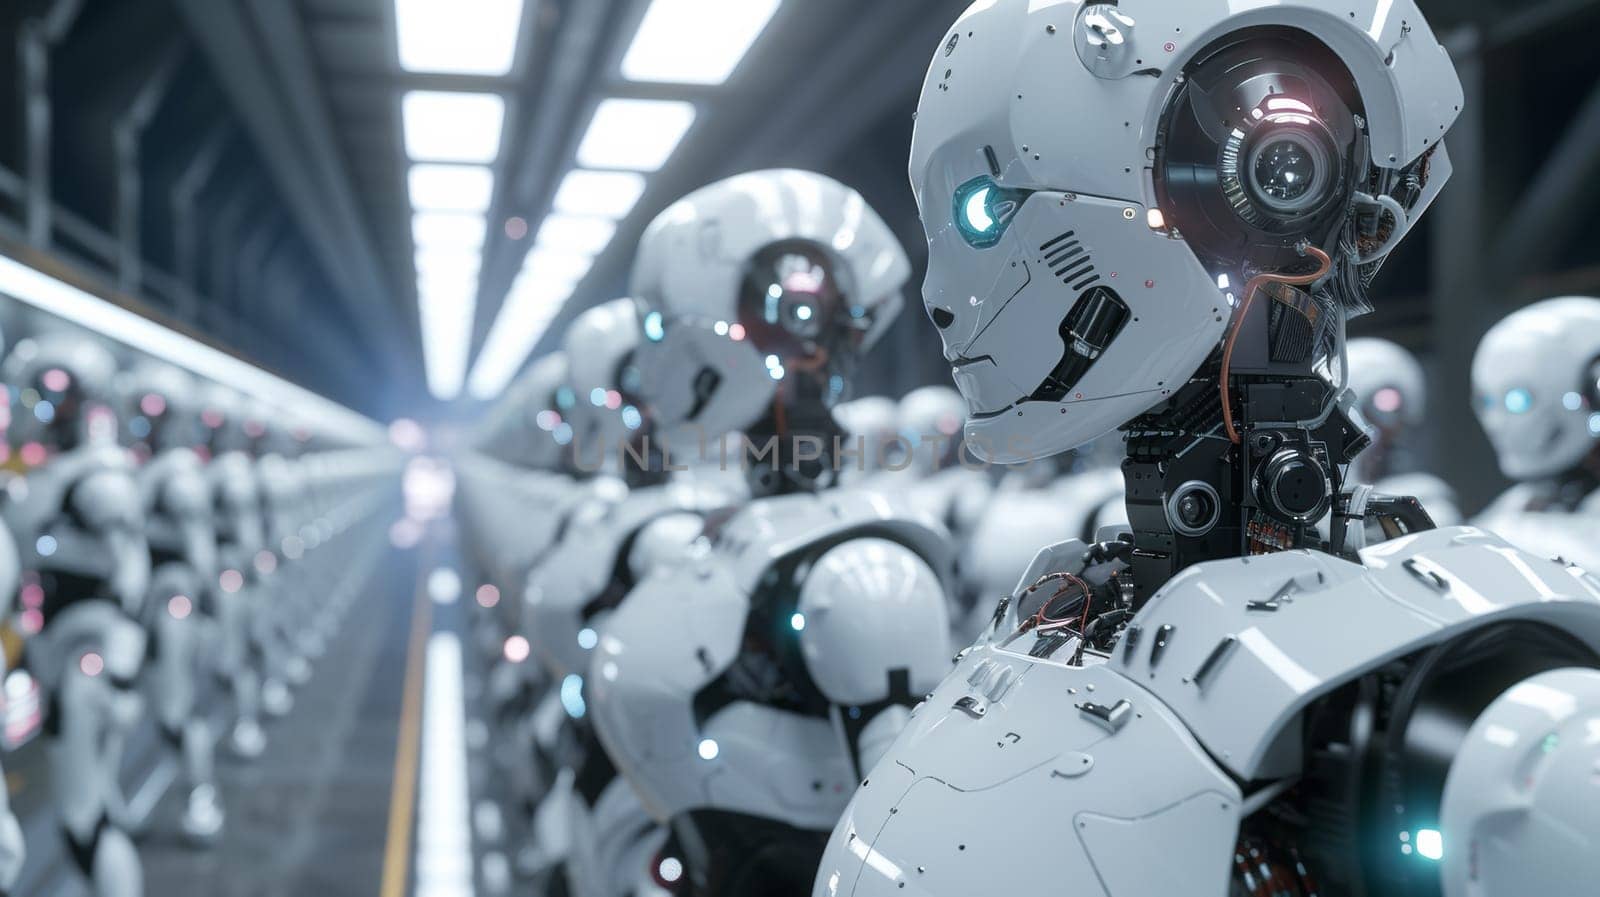 A row of robots lined up in a warehouse with lights on